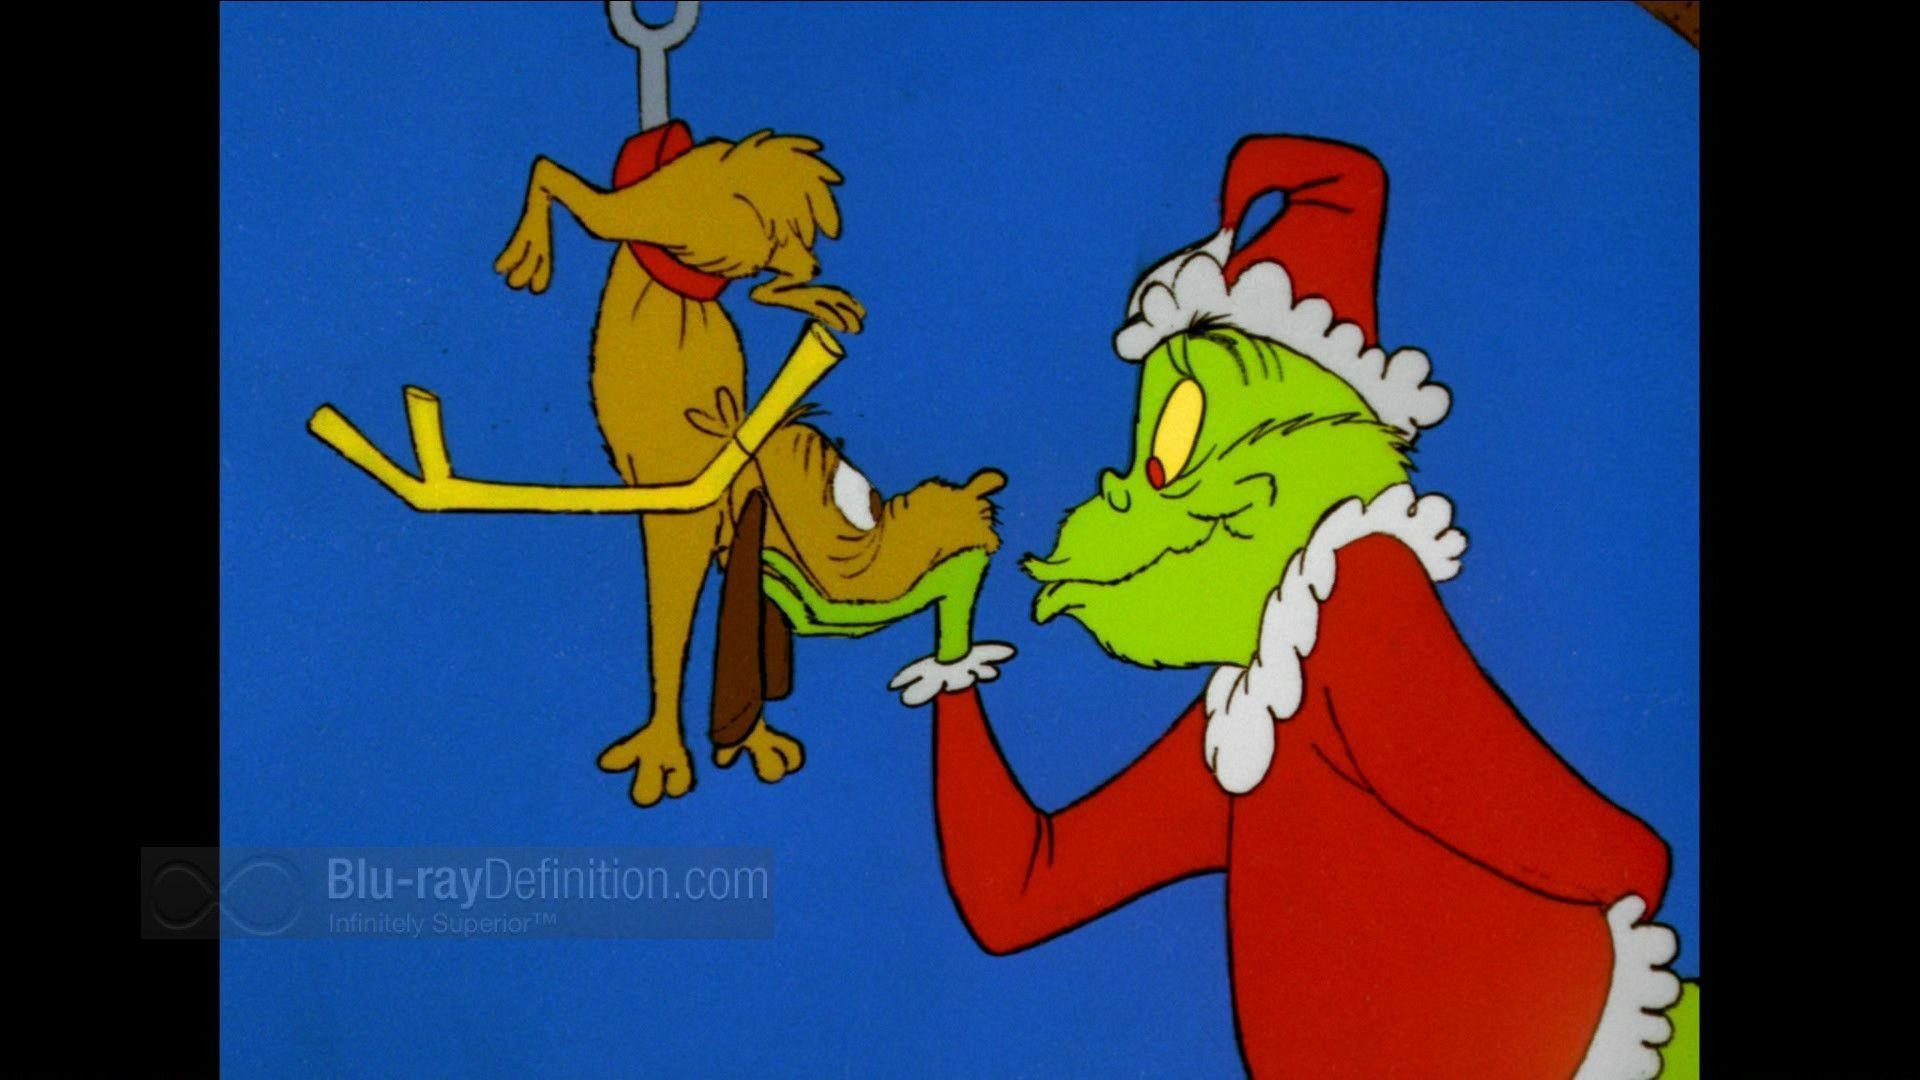 Wallpaper For > The Grinch Christmas Wallpaper